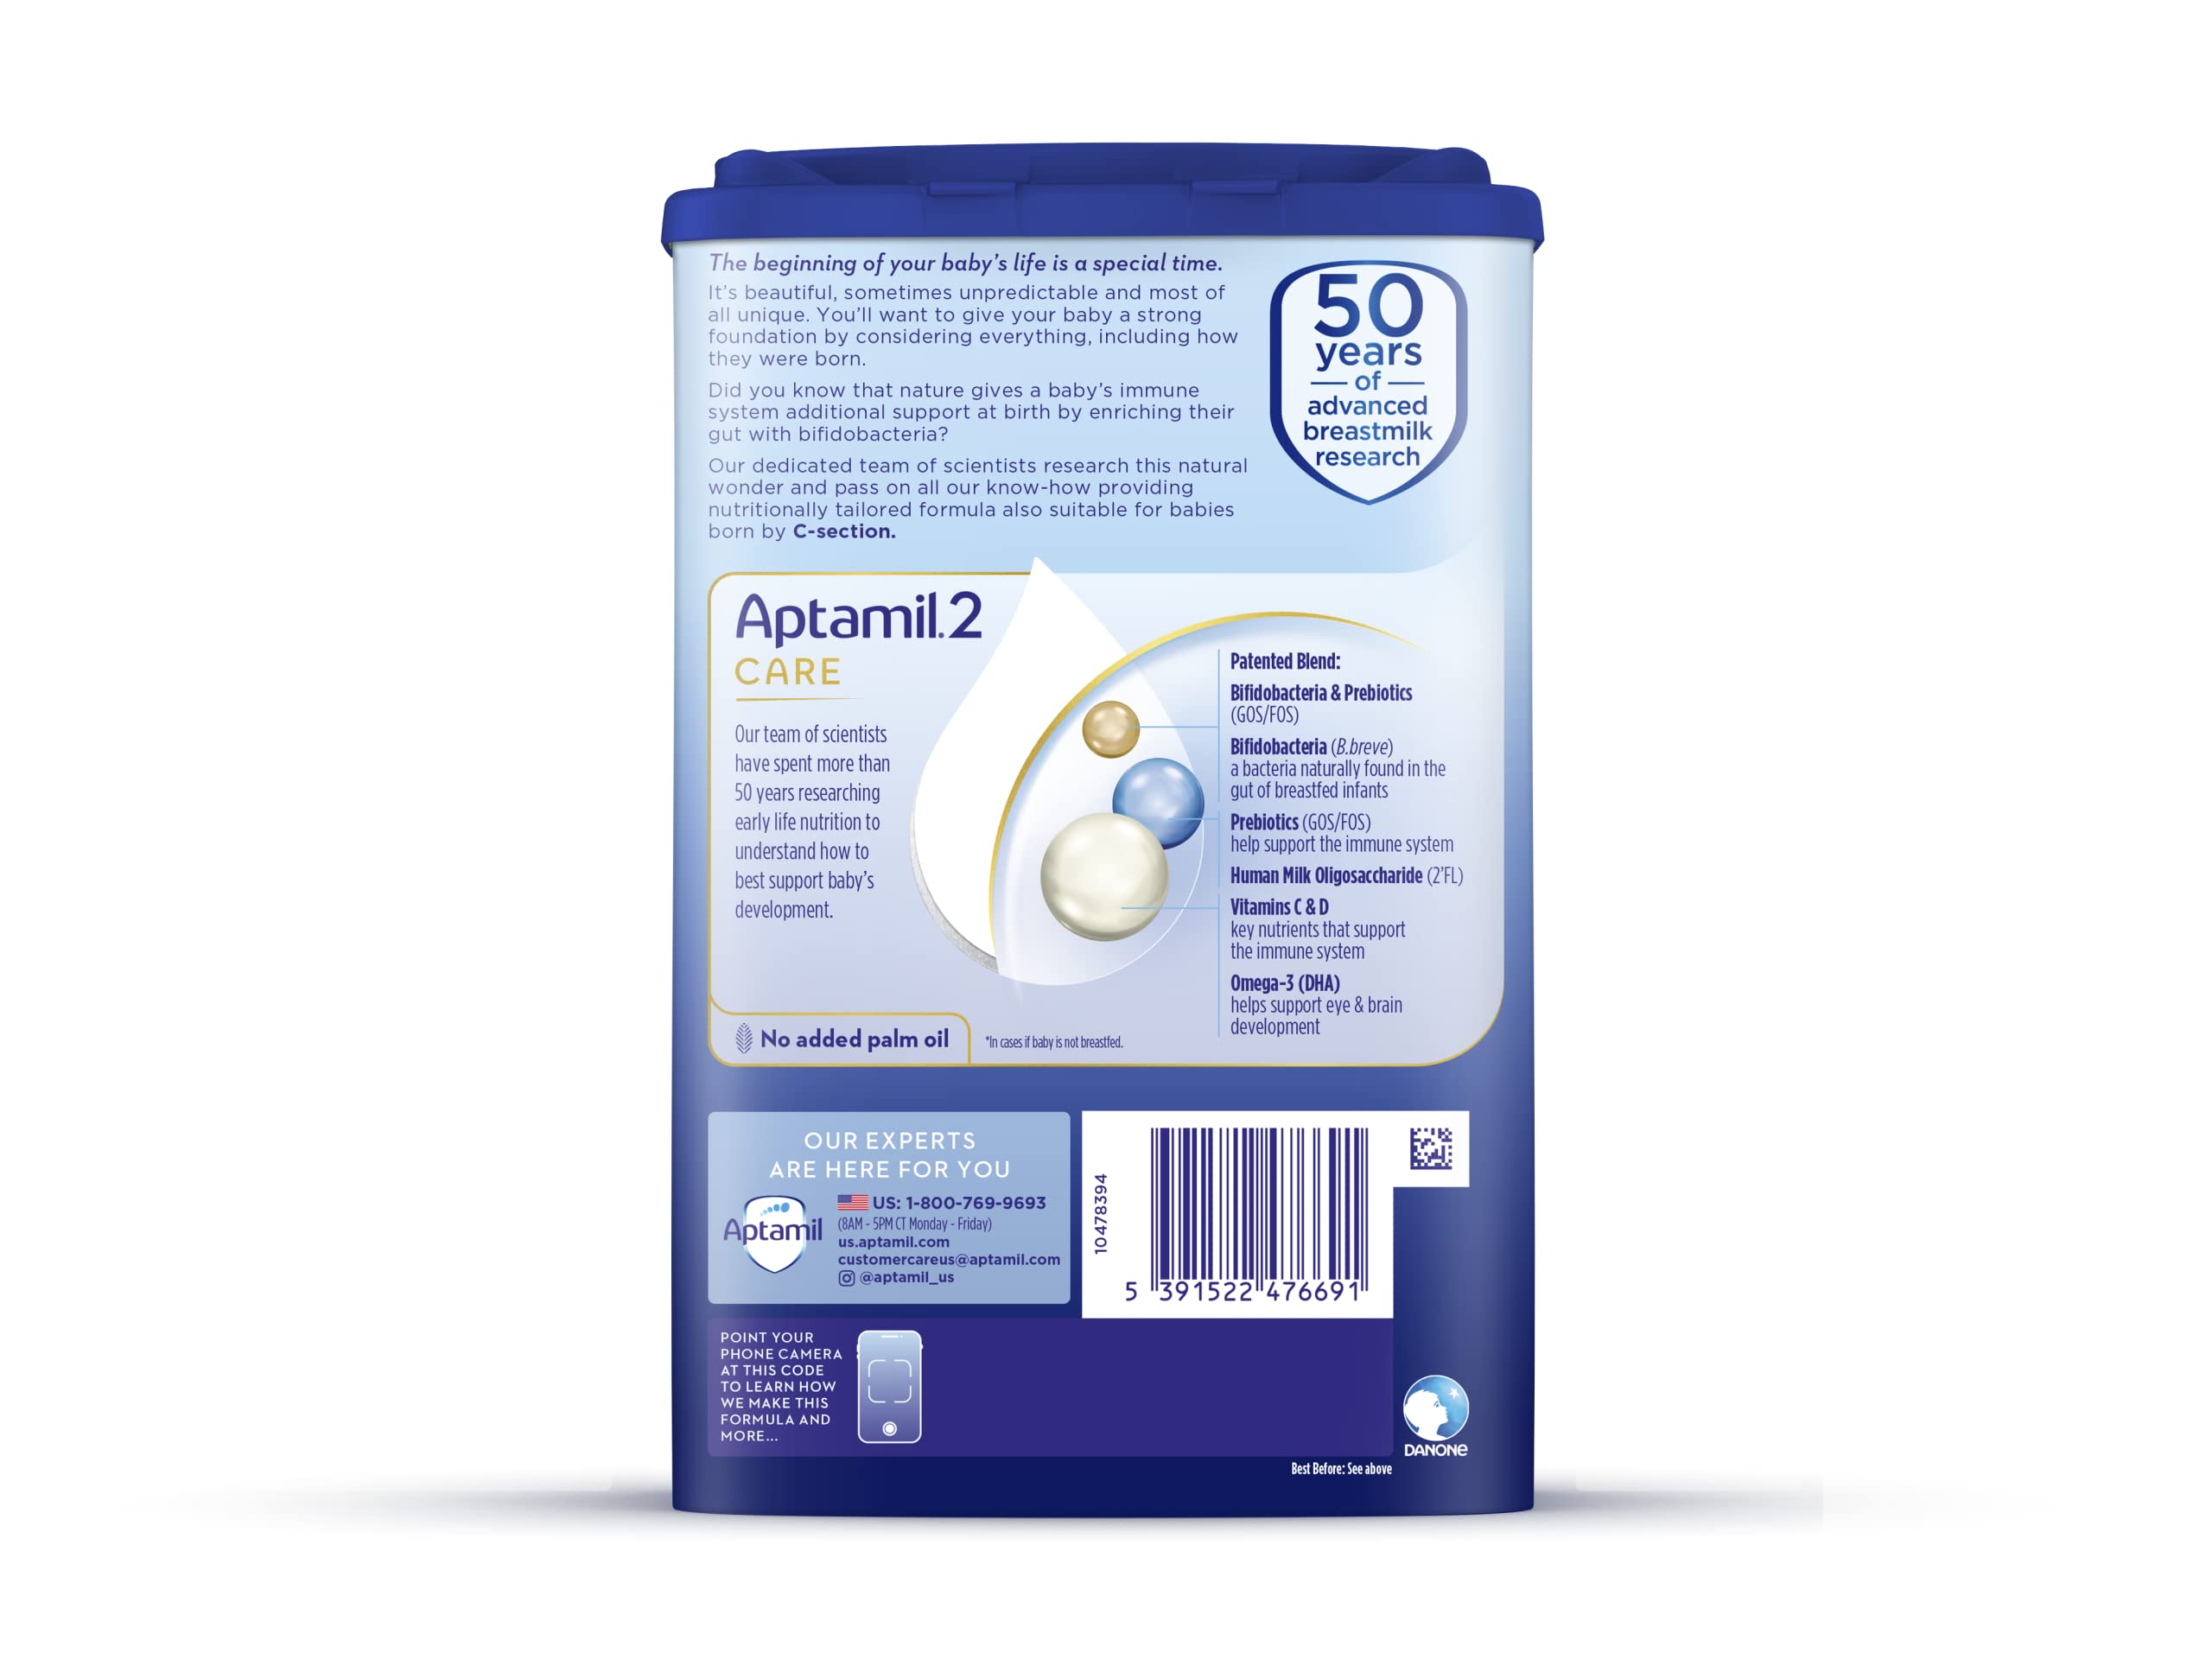 Aptamil Care Stage 2, Milk Based Powder Infant Formula for 6+ Months, with DHA & ARA, Omega 3 & 6, Prebiotics, Contains No Palm Oil, 28.2 Ounces